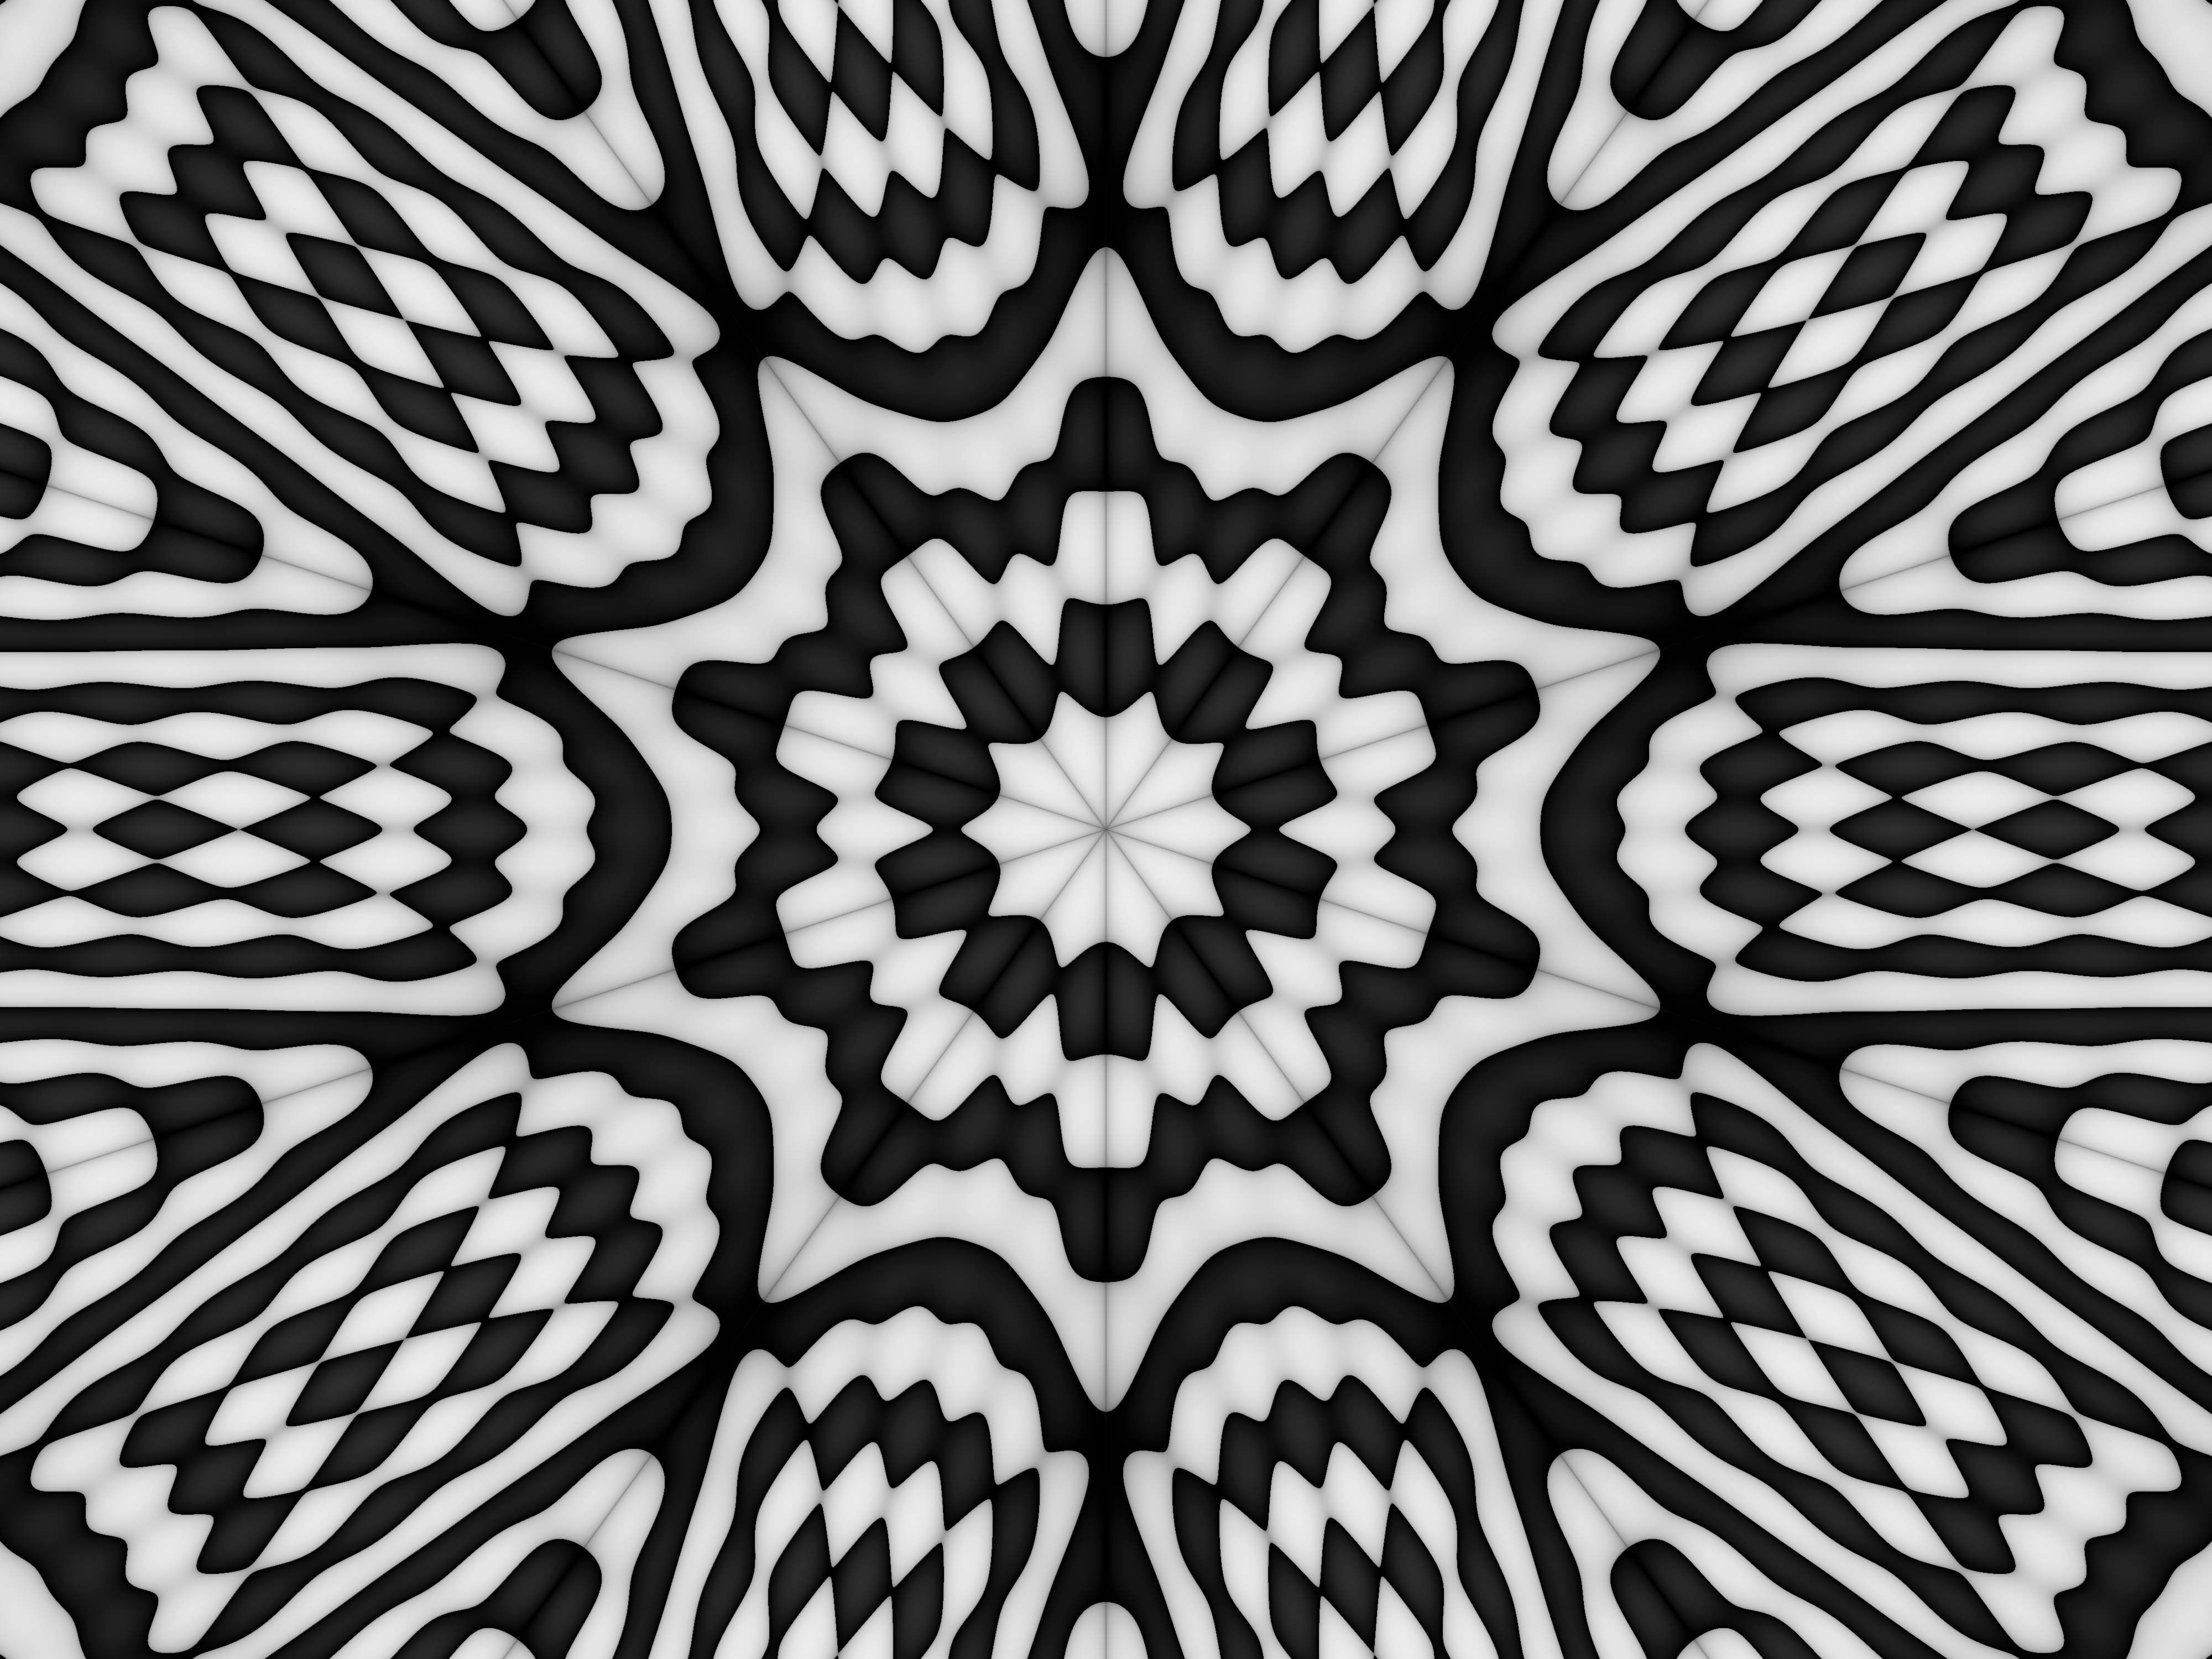 Abstract black & white 4k Ultra HD Wallpaper. Background Image